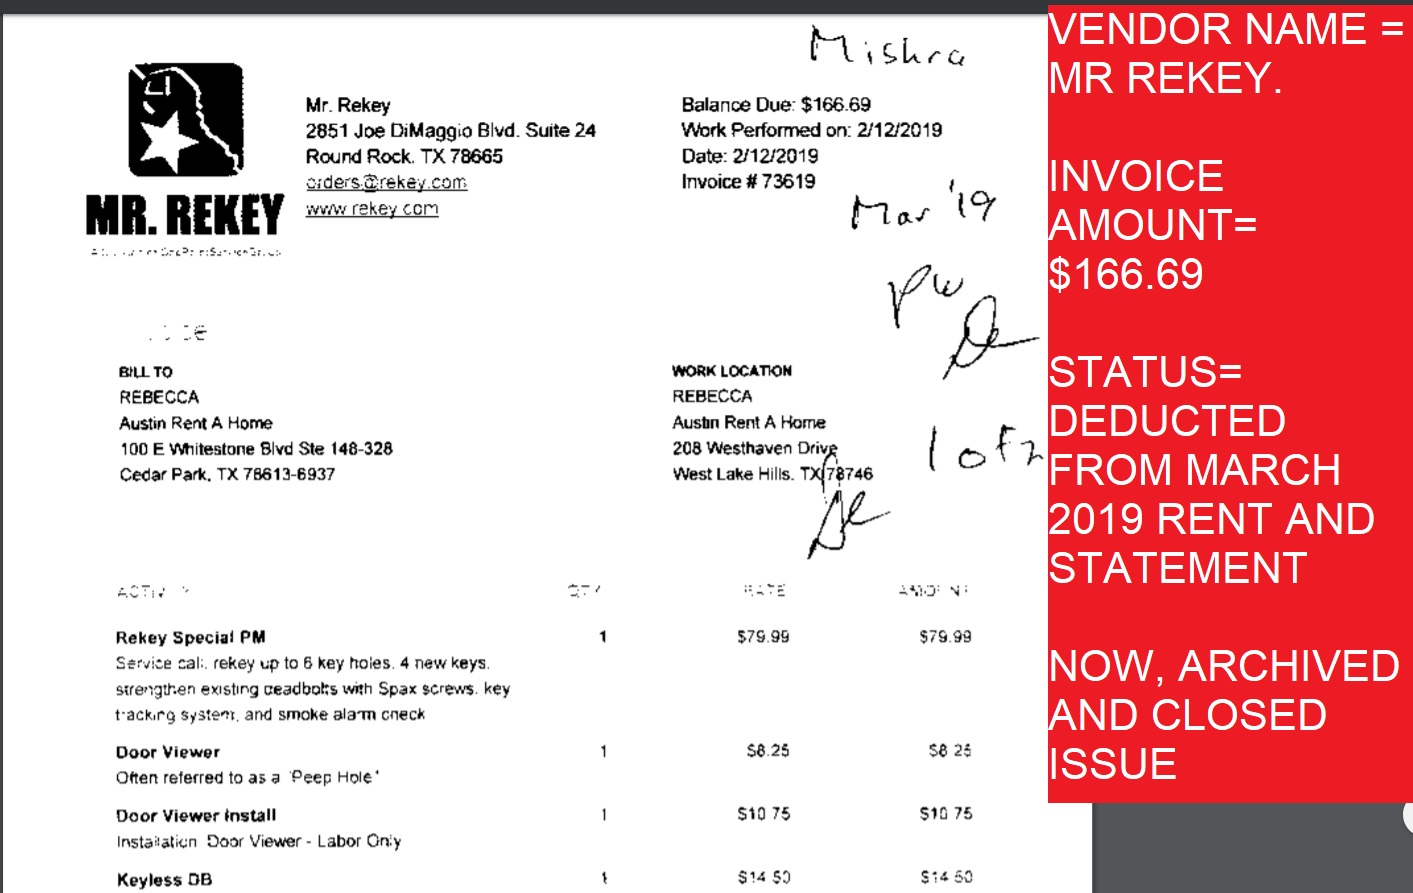 VENDOR NAME = MR REKEY. $166.69 - STATUS = PAID BY LANDLORD BY MARCH RENT DEDUCTION - ISSUE CLOSED NOW